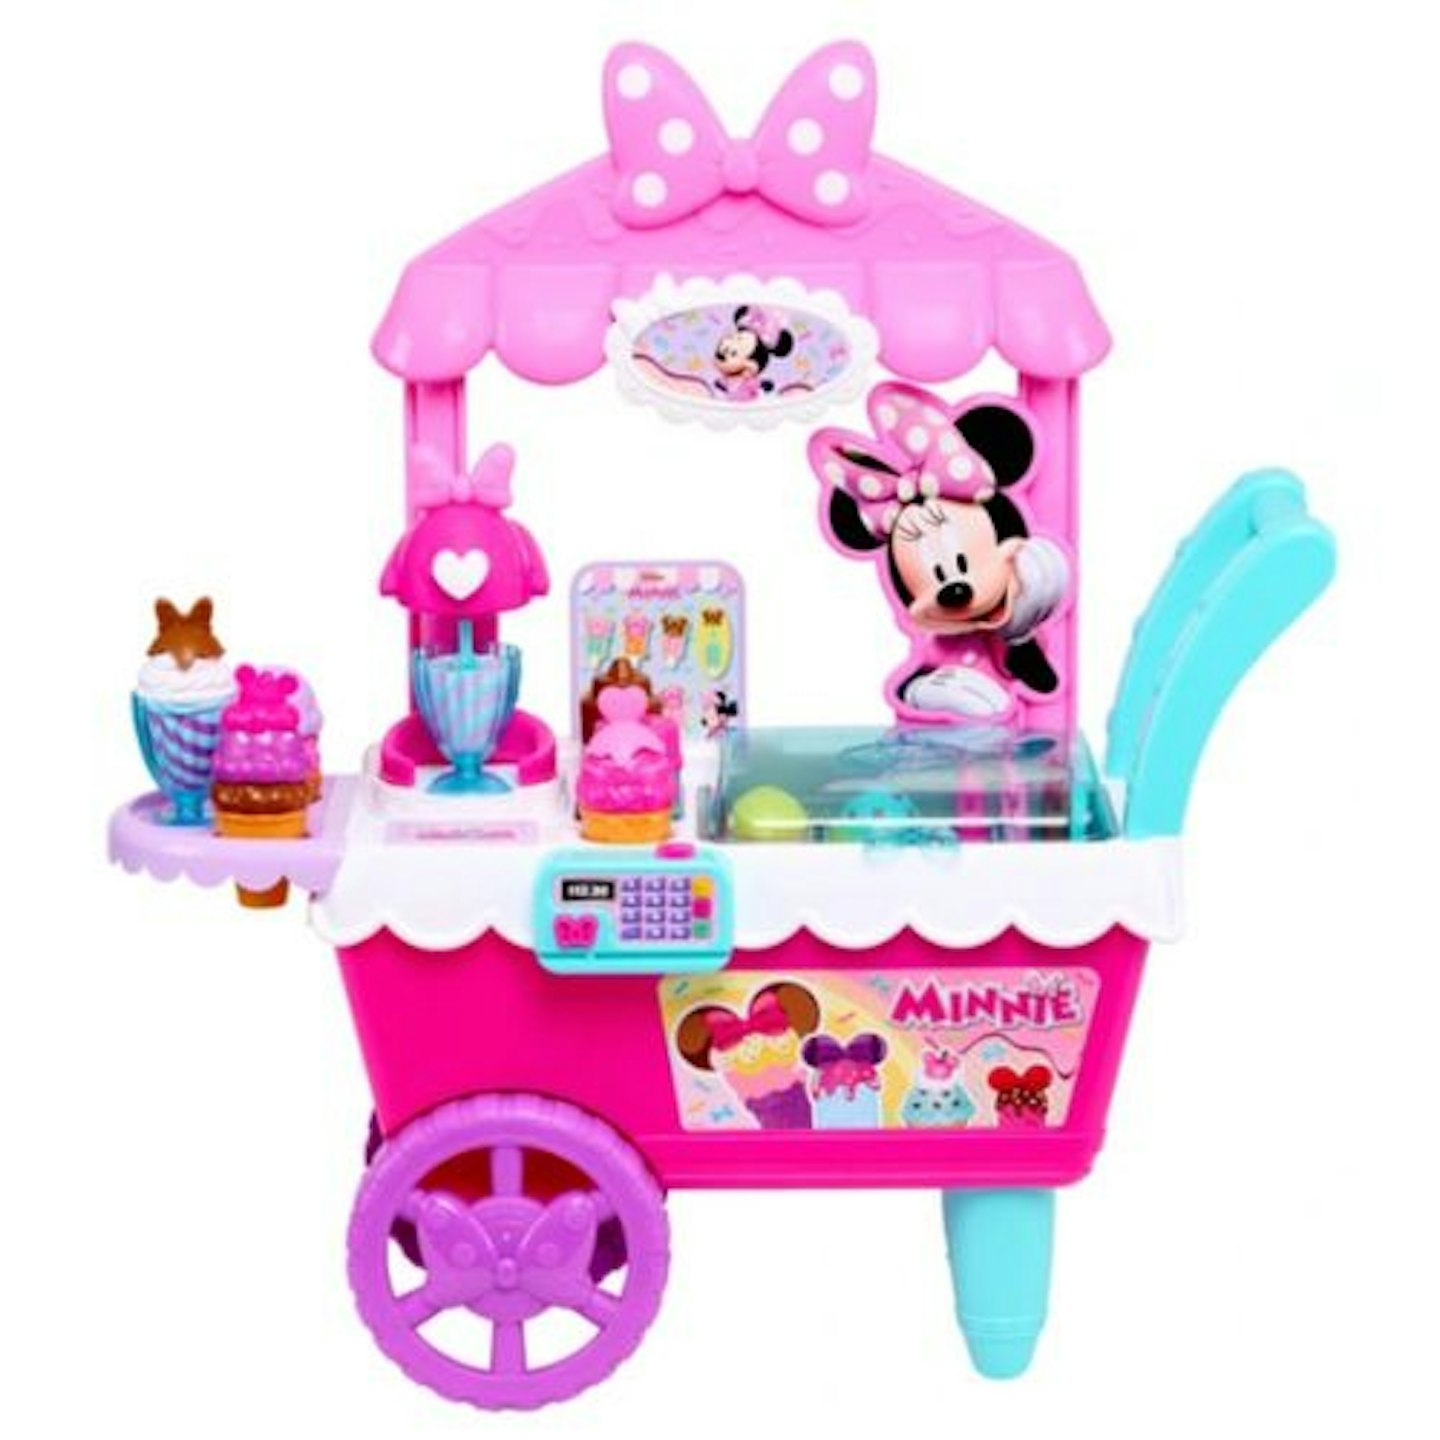 Best Minnie Mouse toy Disney Junior Minnie Mouse Sweets & Treats Ice Cream Cart